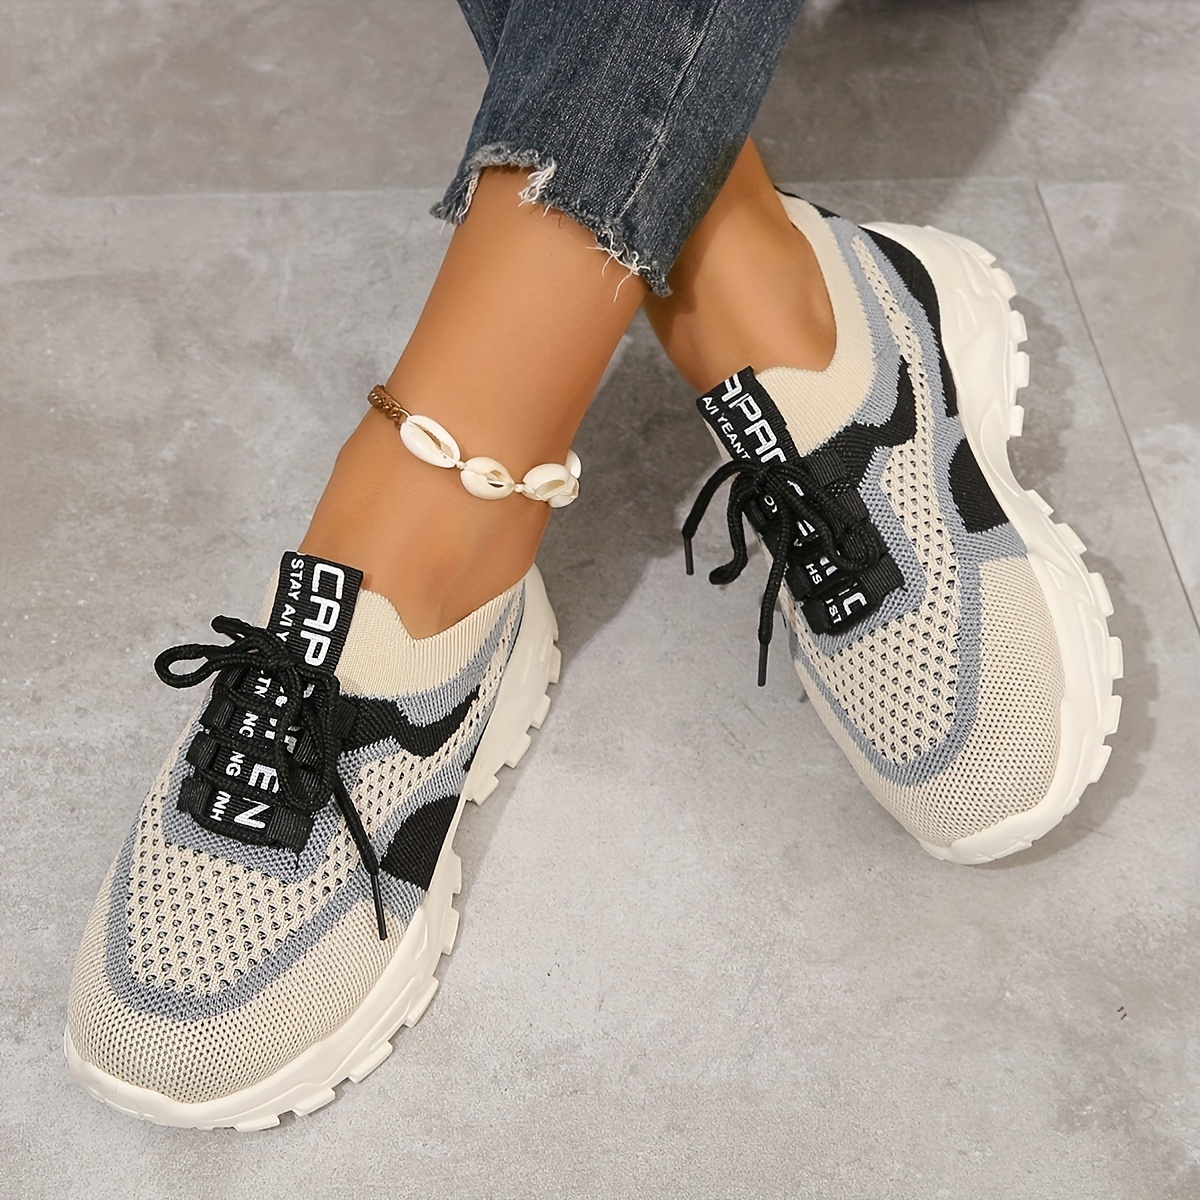 Chaussure Femme Confortable Sneakers Chaussures pour Femmes